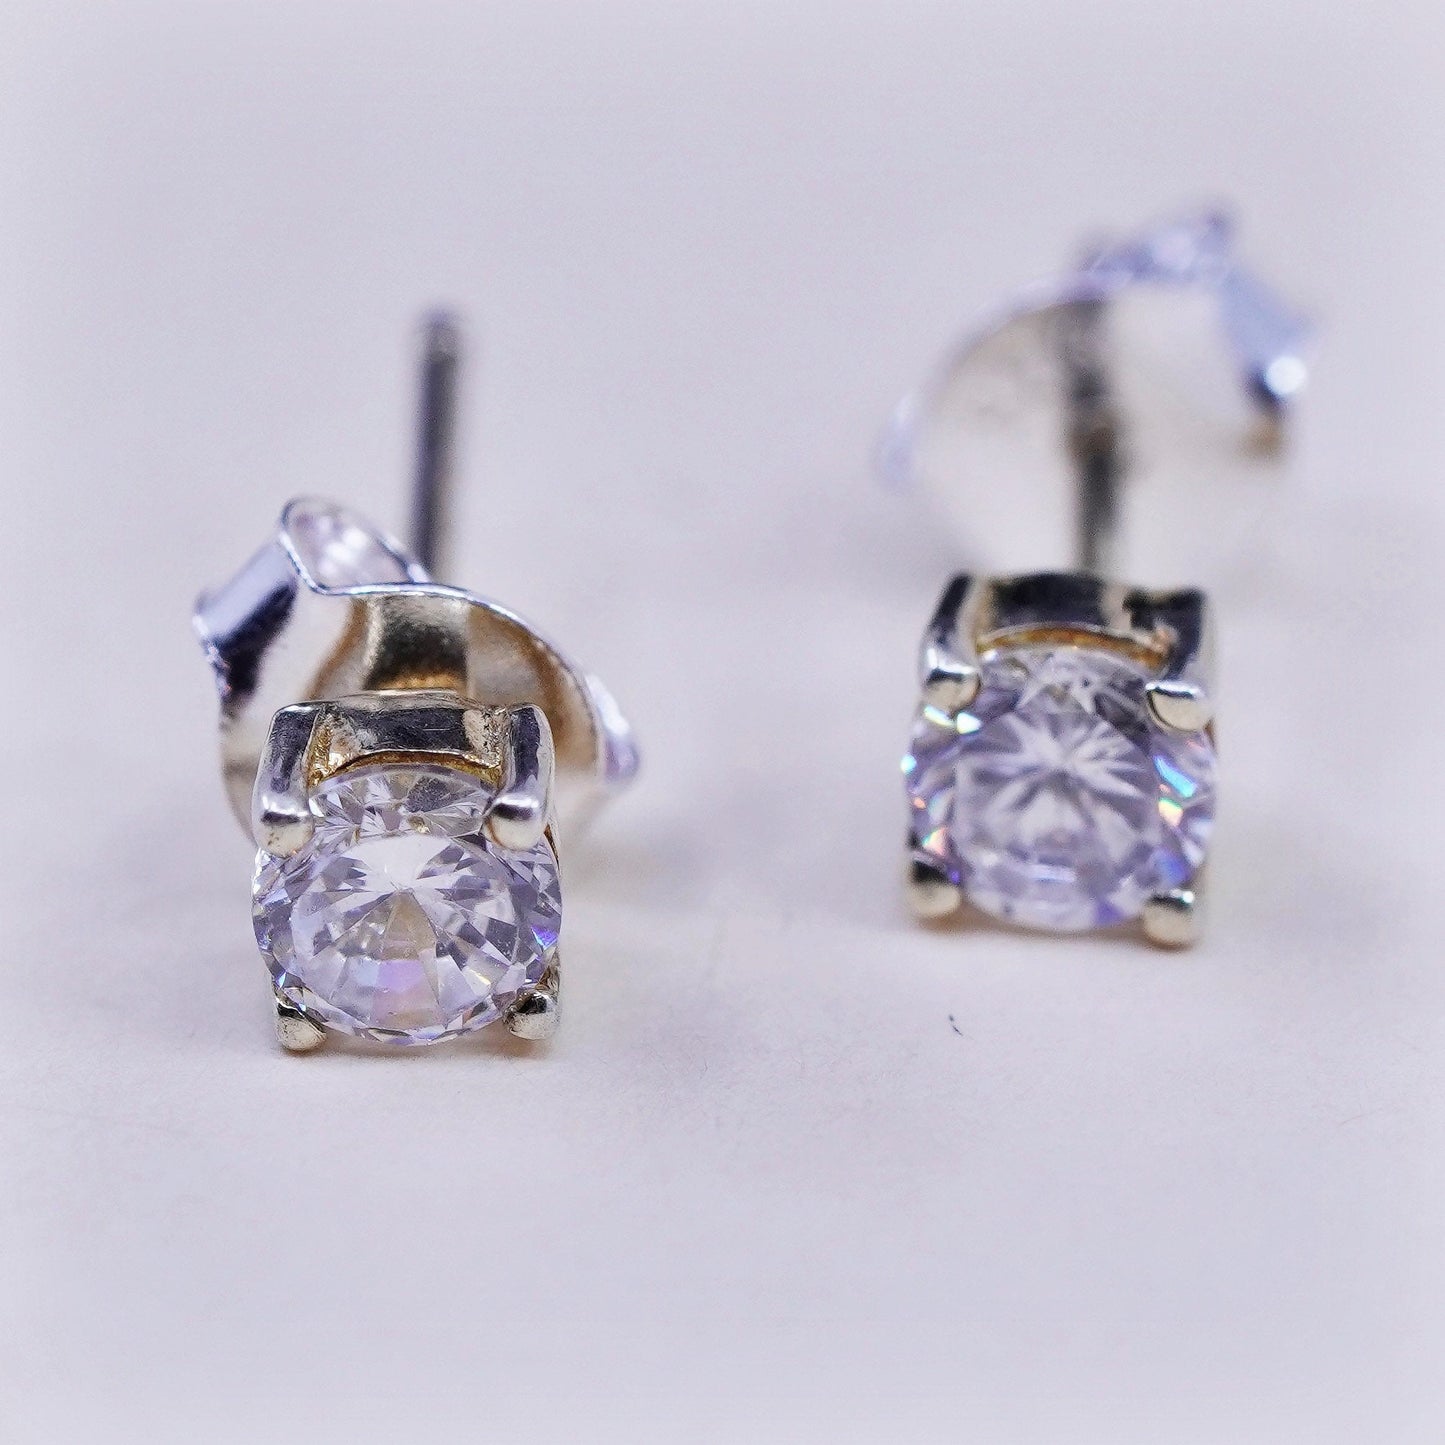 3mm, Vintage gold over sterling 925 silver cz studs, minimalist earrings